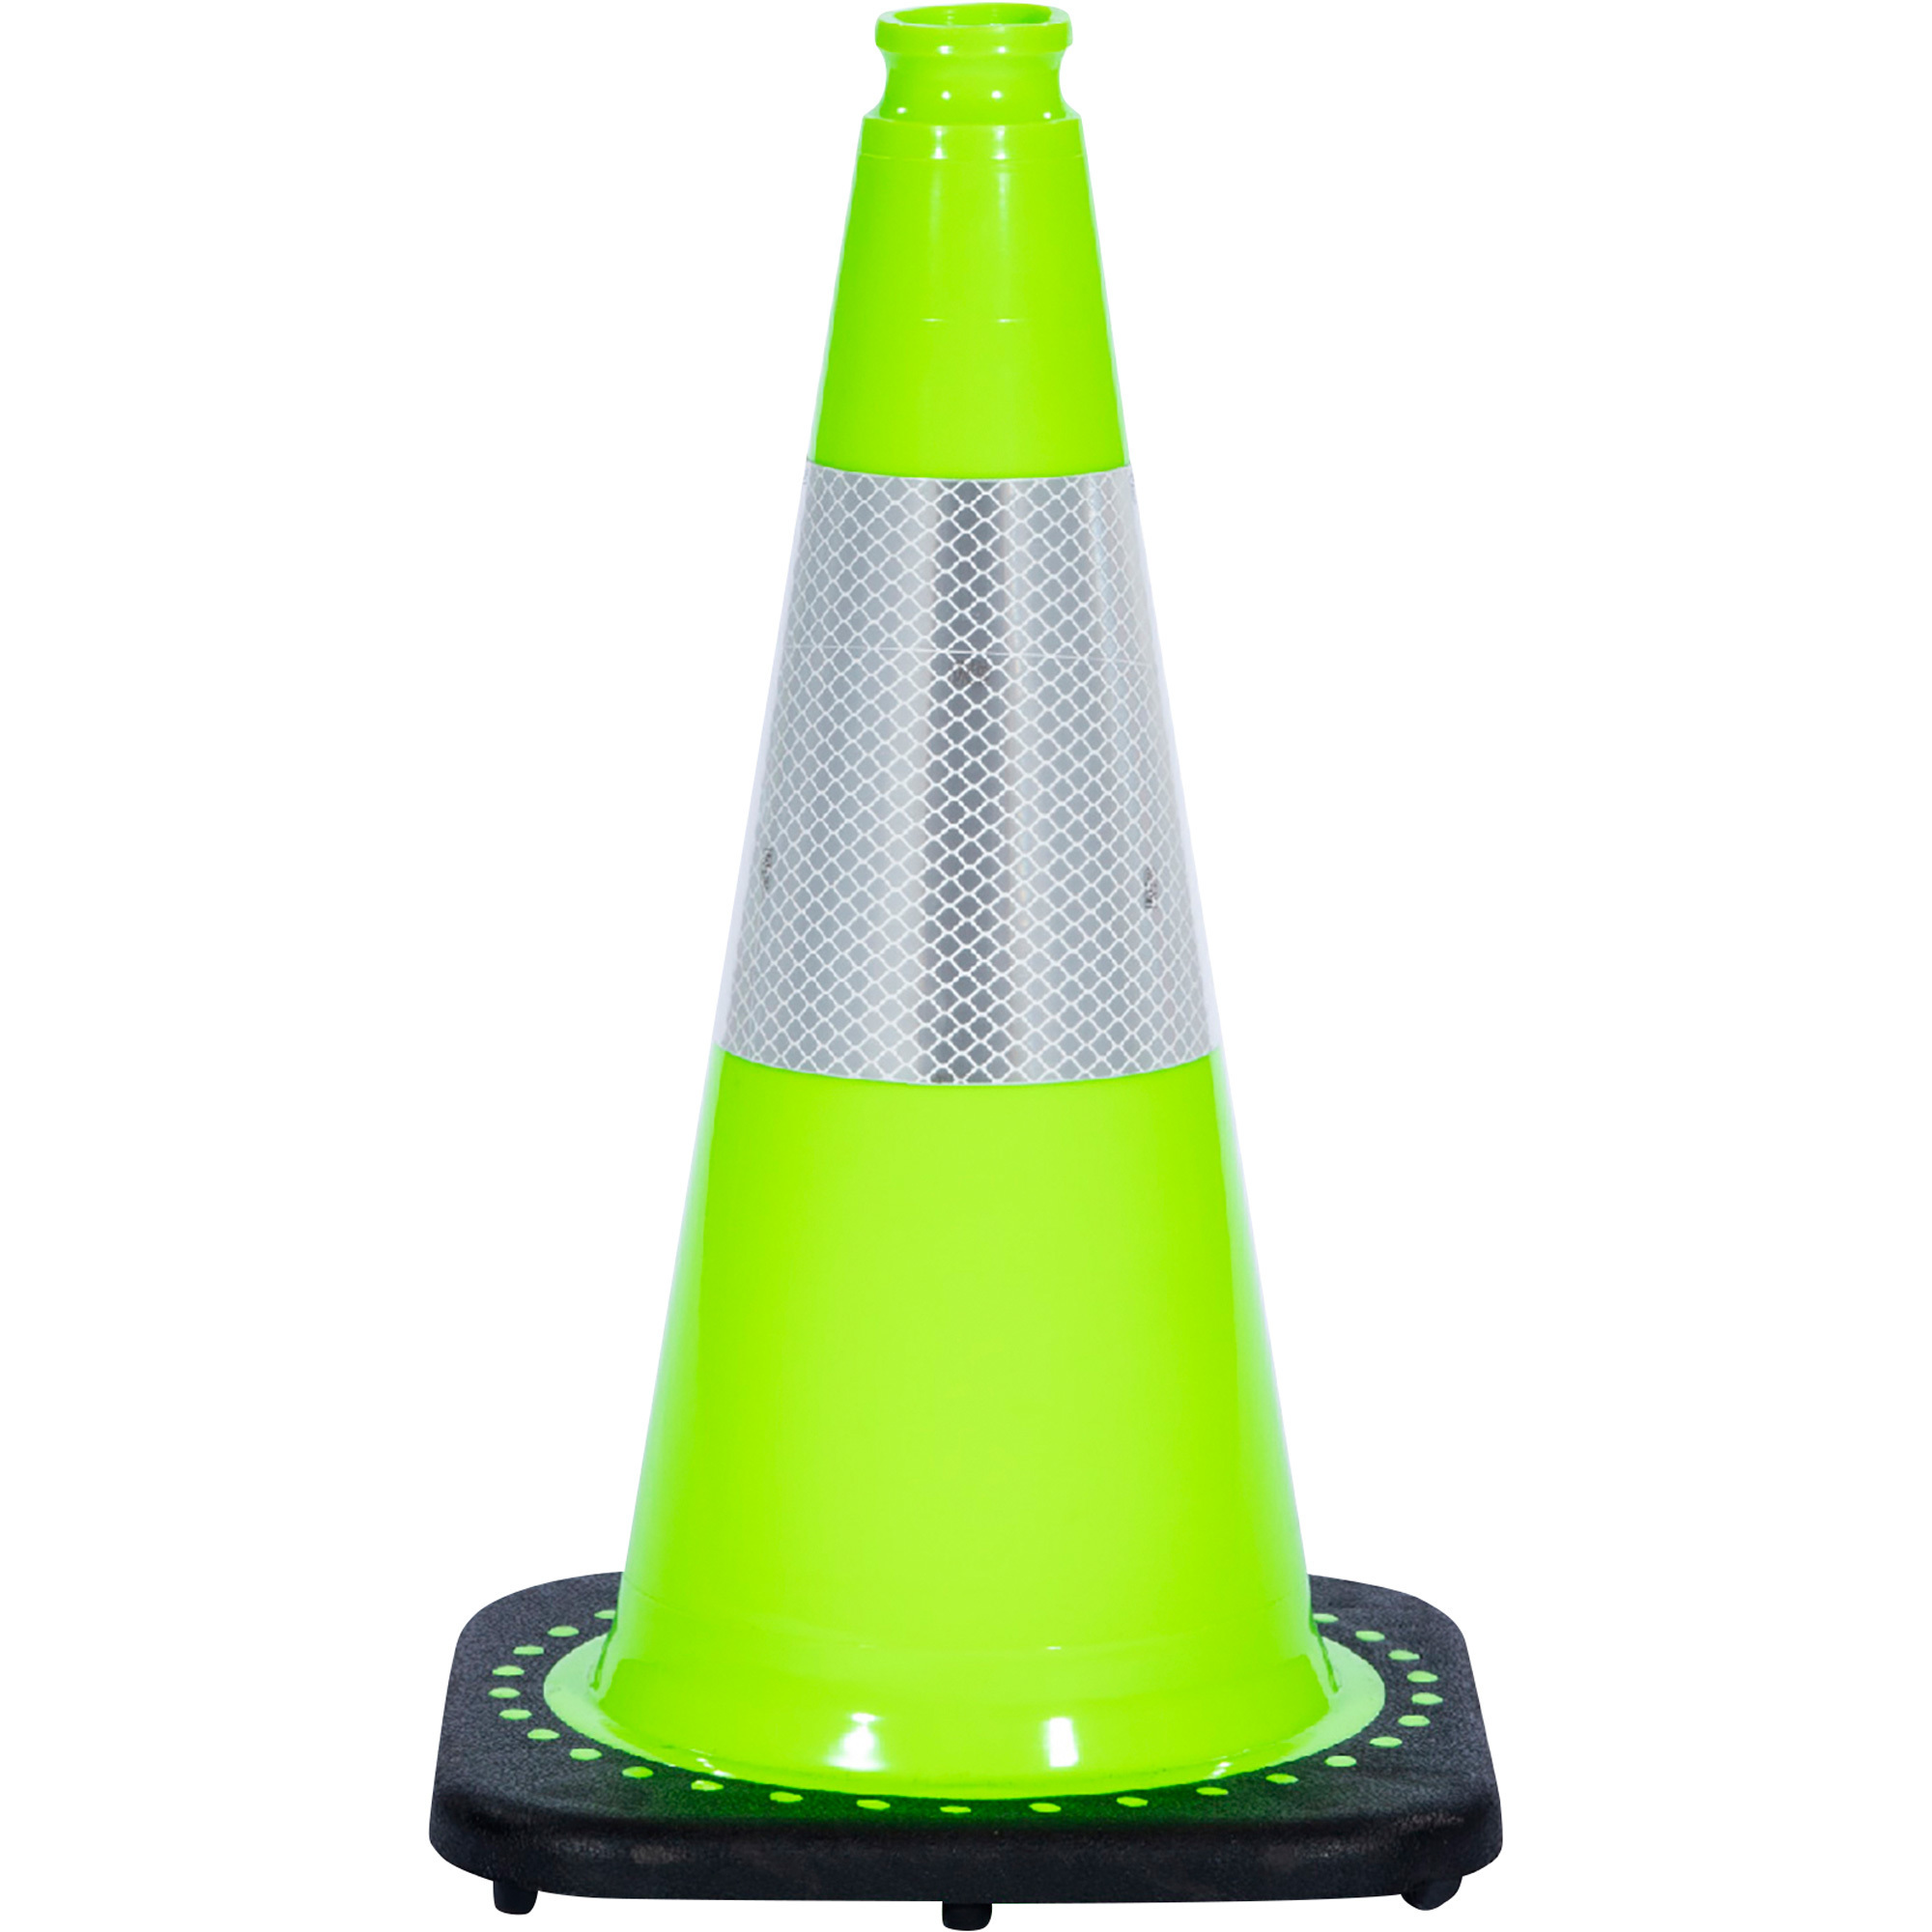 JBC Revolution Series Traffic Cone, Lime, With 3M Reflective Collar, 18Inch, Model RS45015C3M6 LIME